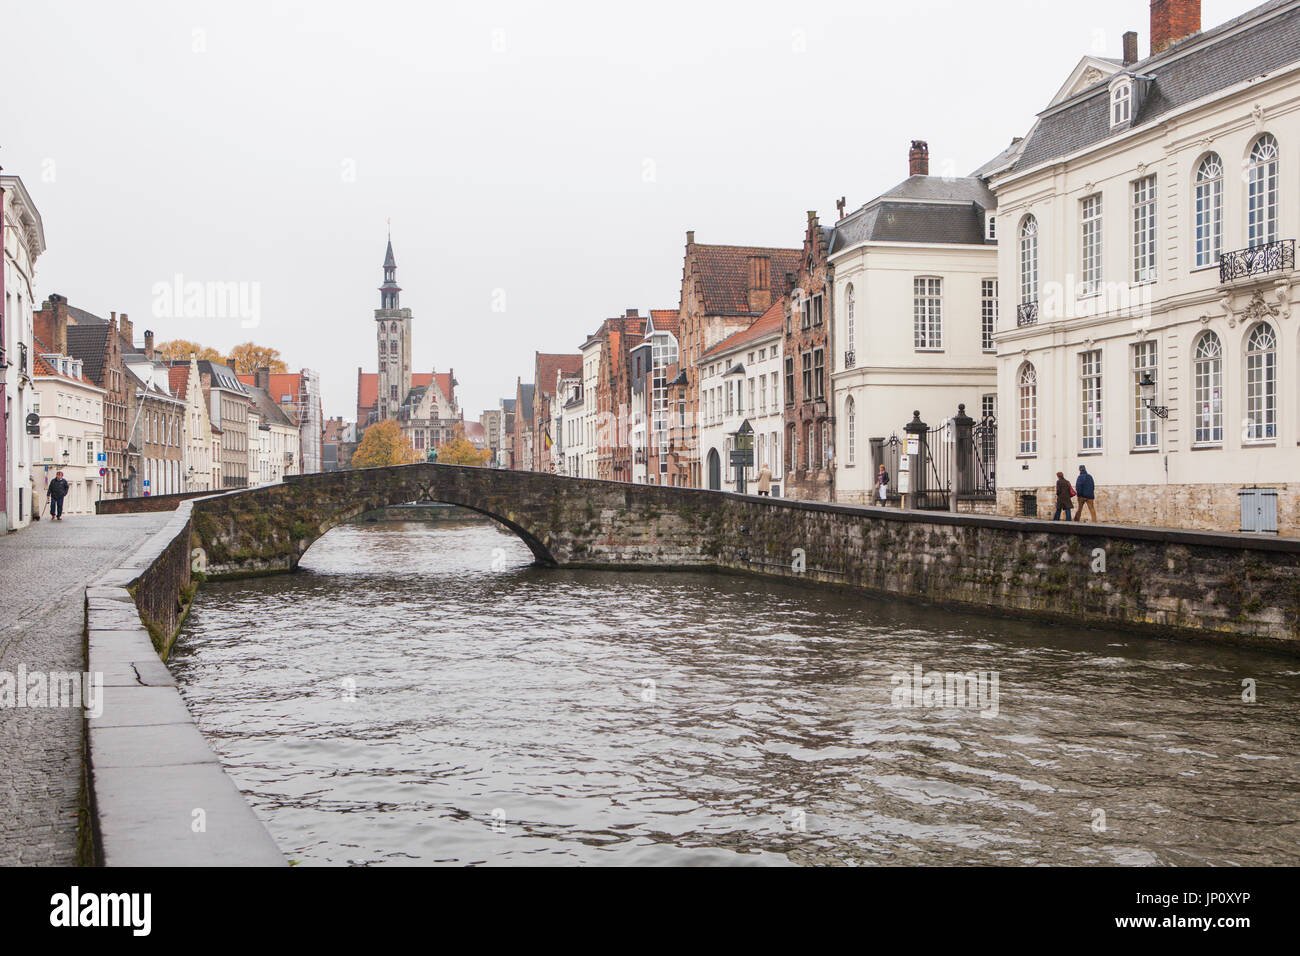 Bruges, Belgium – October 31, 2010: A few pedestrians in the rain on Spinolarei, Koningstraat bridge, the statue of Van Eyck and the Poortersloge beyond. Bruges is sometimes referred to as the Venice of the North. Stock Photo